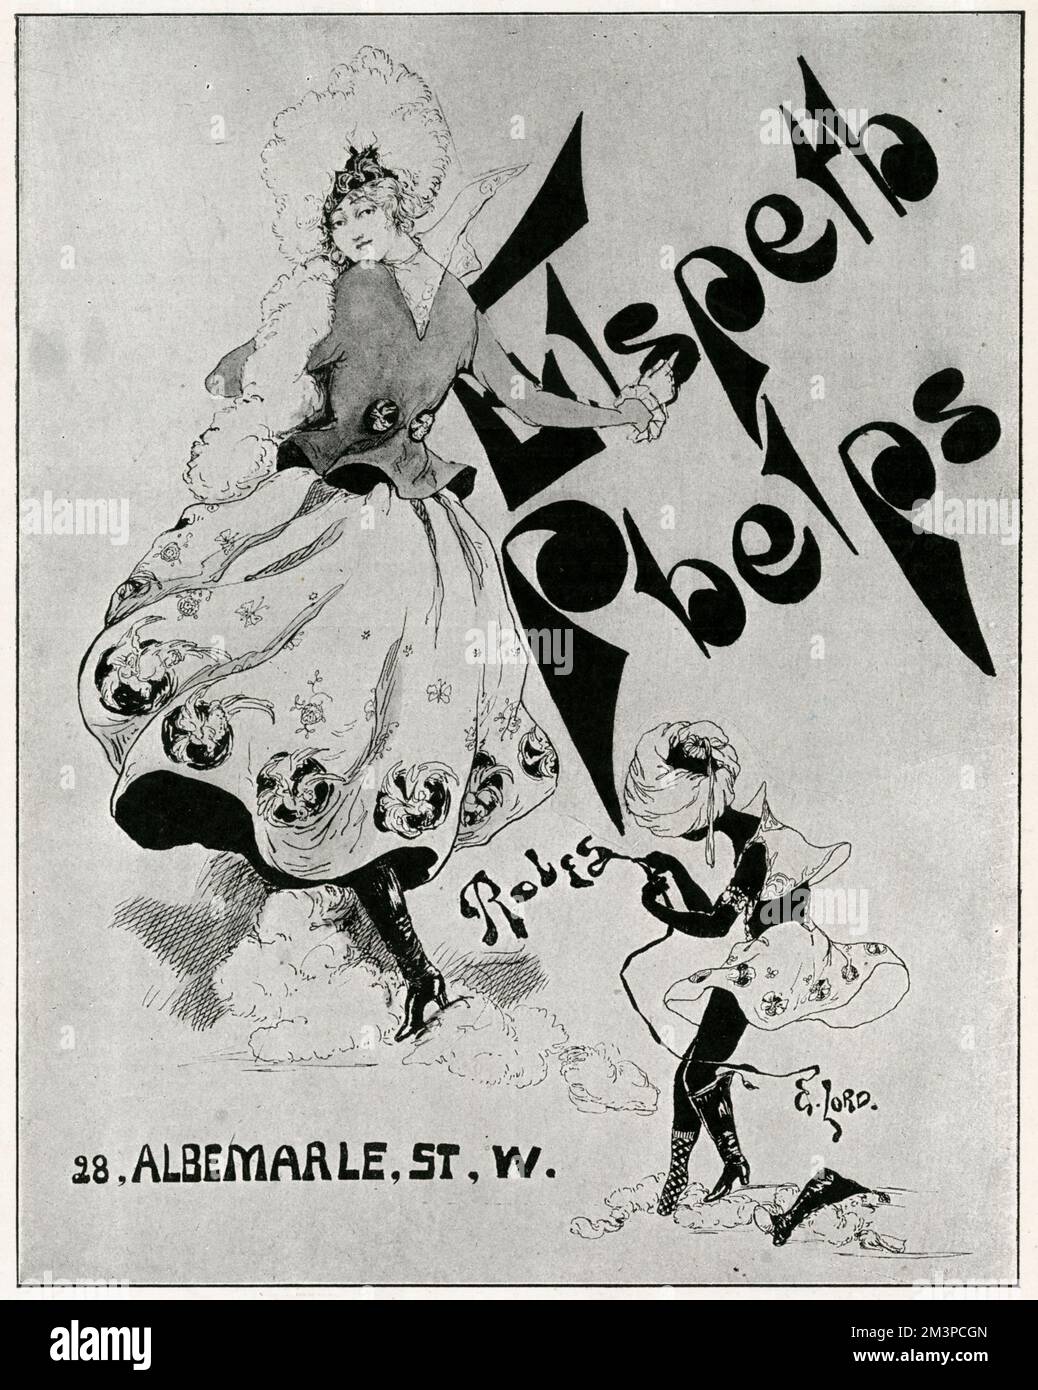 Advertisement for Elspeth Phelps of Albemarle St, London.  Phelps was one of the leading purveyors of fine lady's fashions in London during the First World War and 1920s.  She worked with the notorious designer Reggie le Veulle.  Her business later merged with the couturier Paquin.      1917 Stock Photo